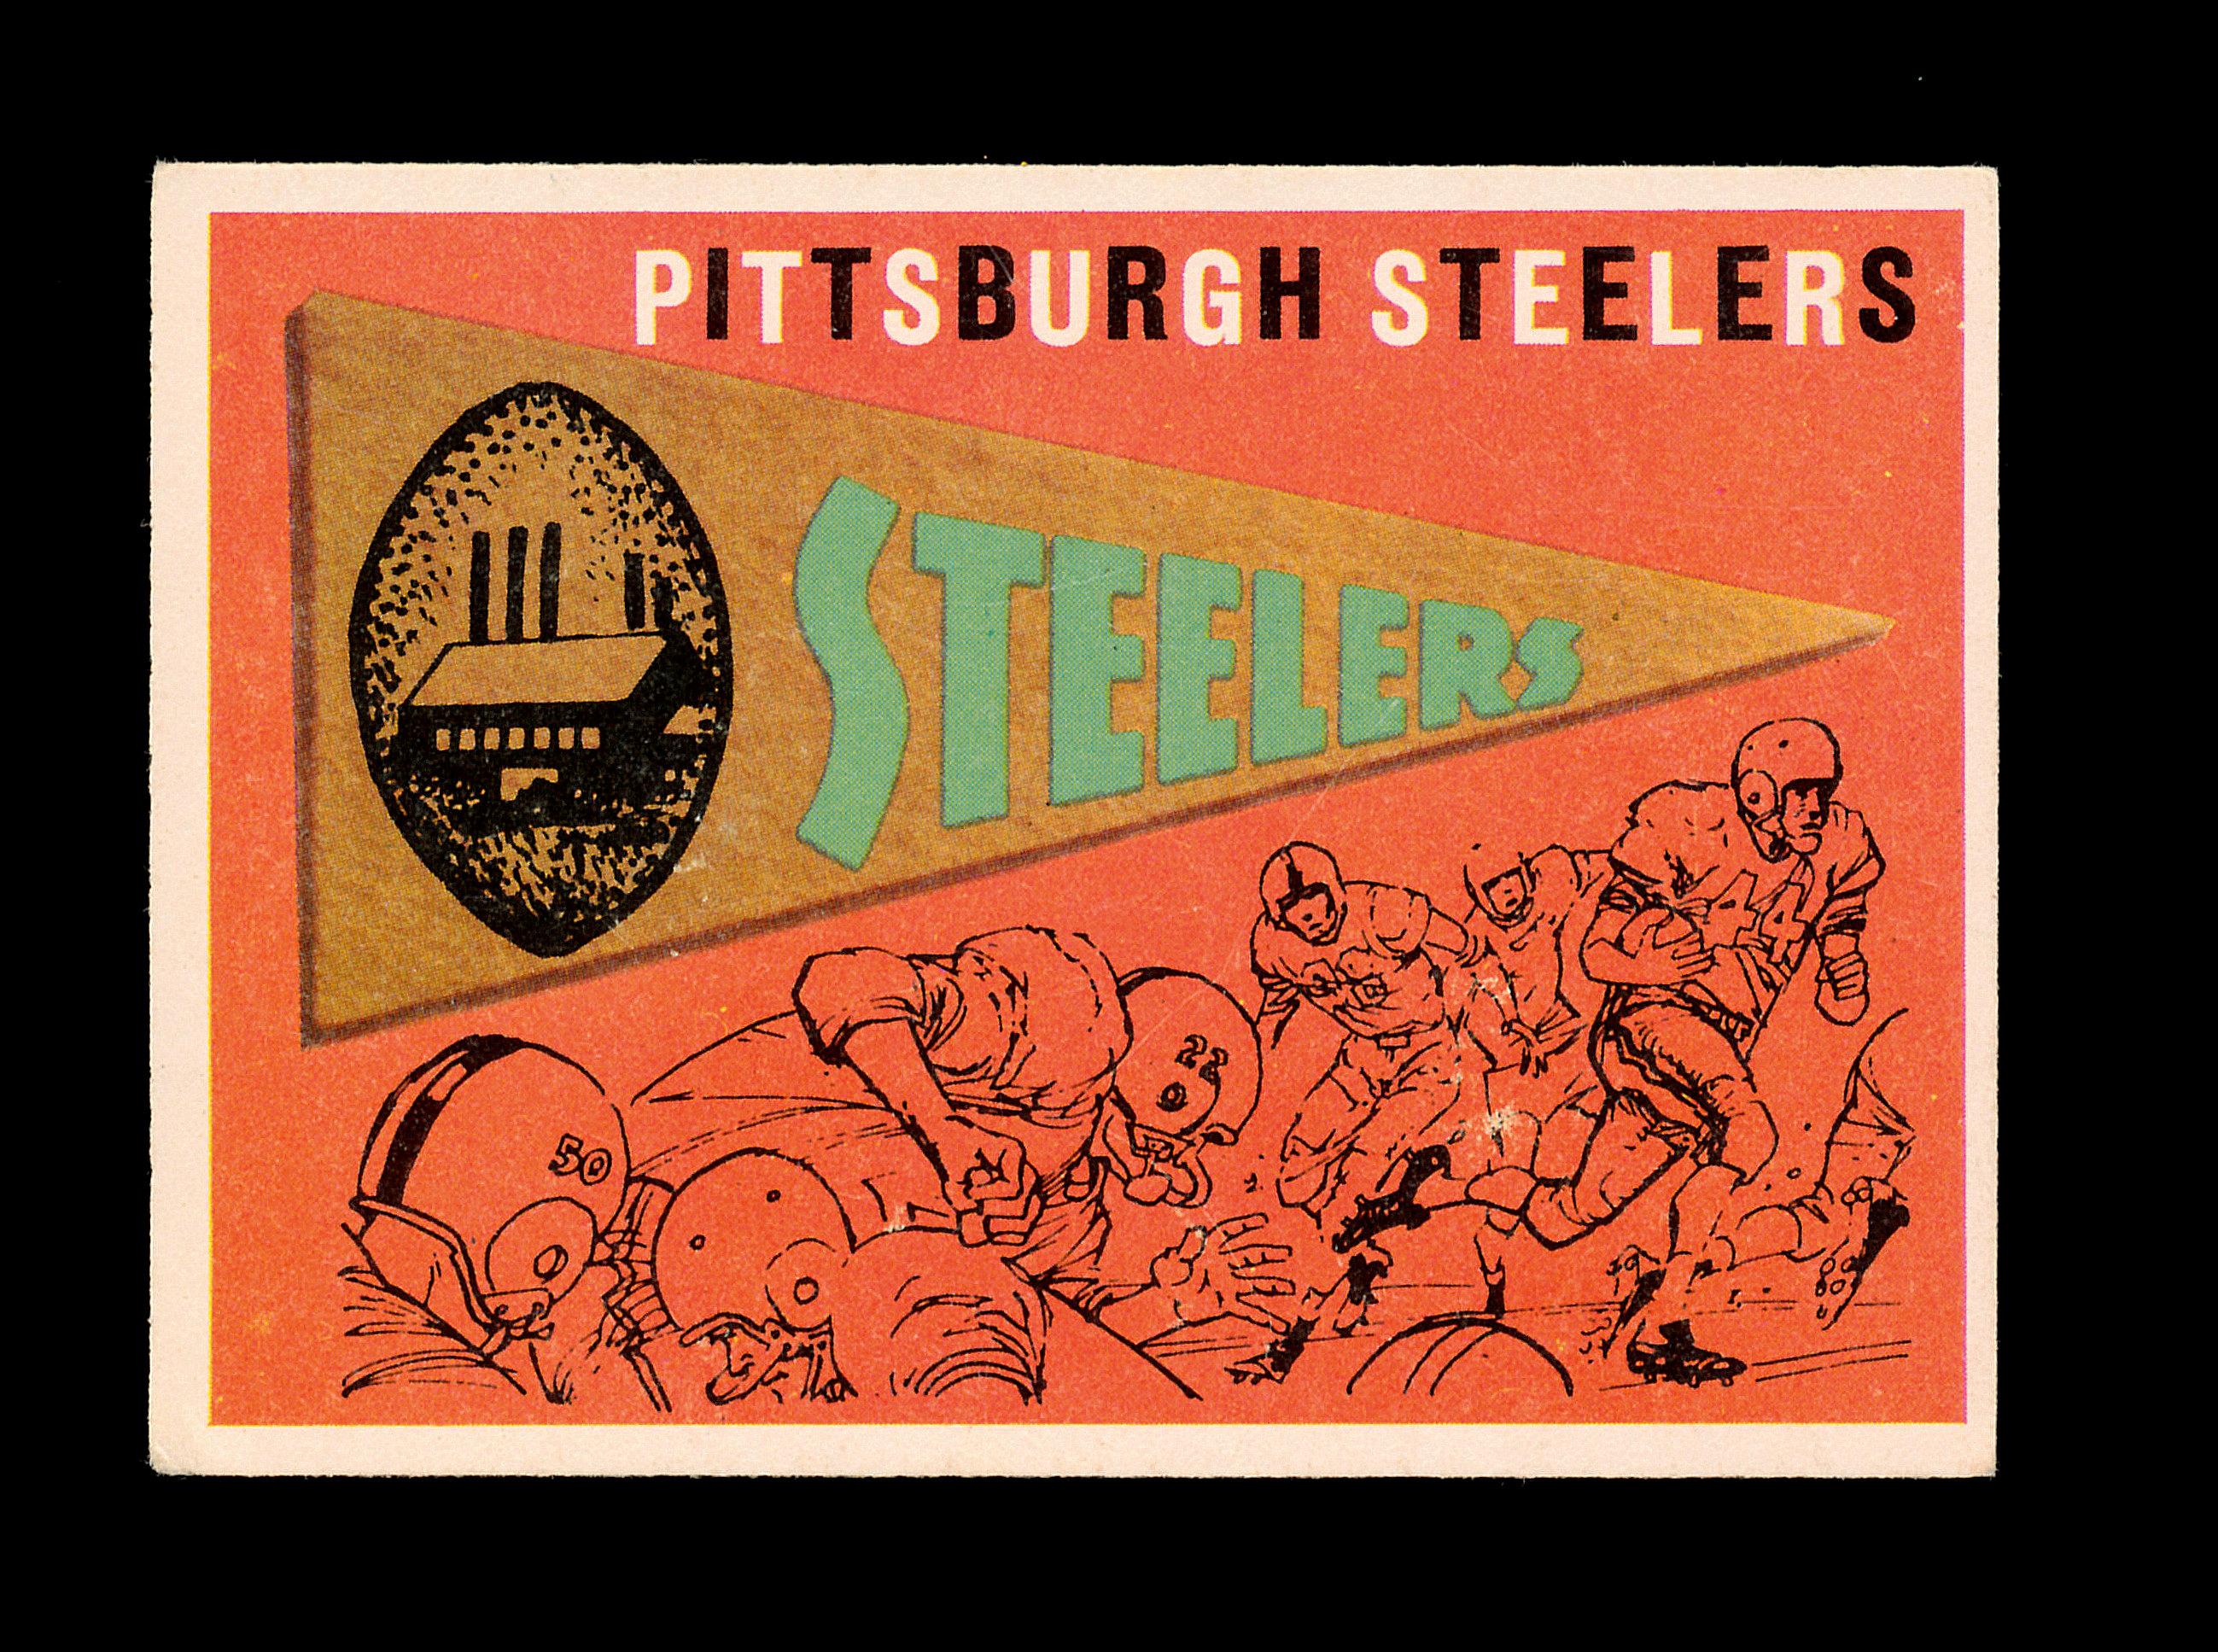 1959 Topps Football Card #9 Pittsburgh Steelers Pennant Card.